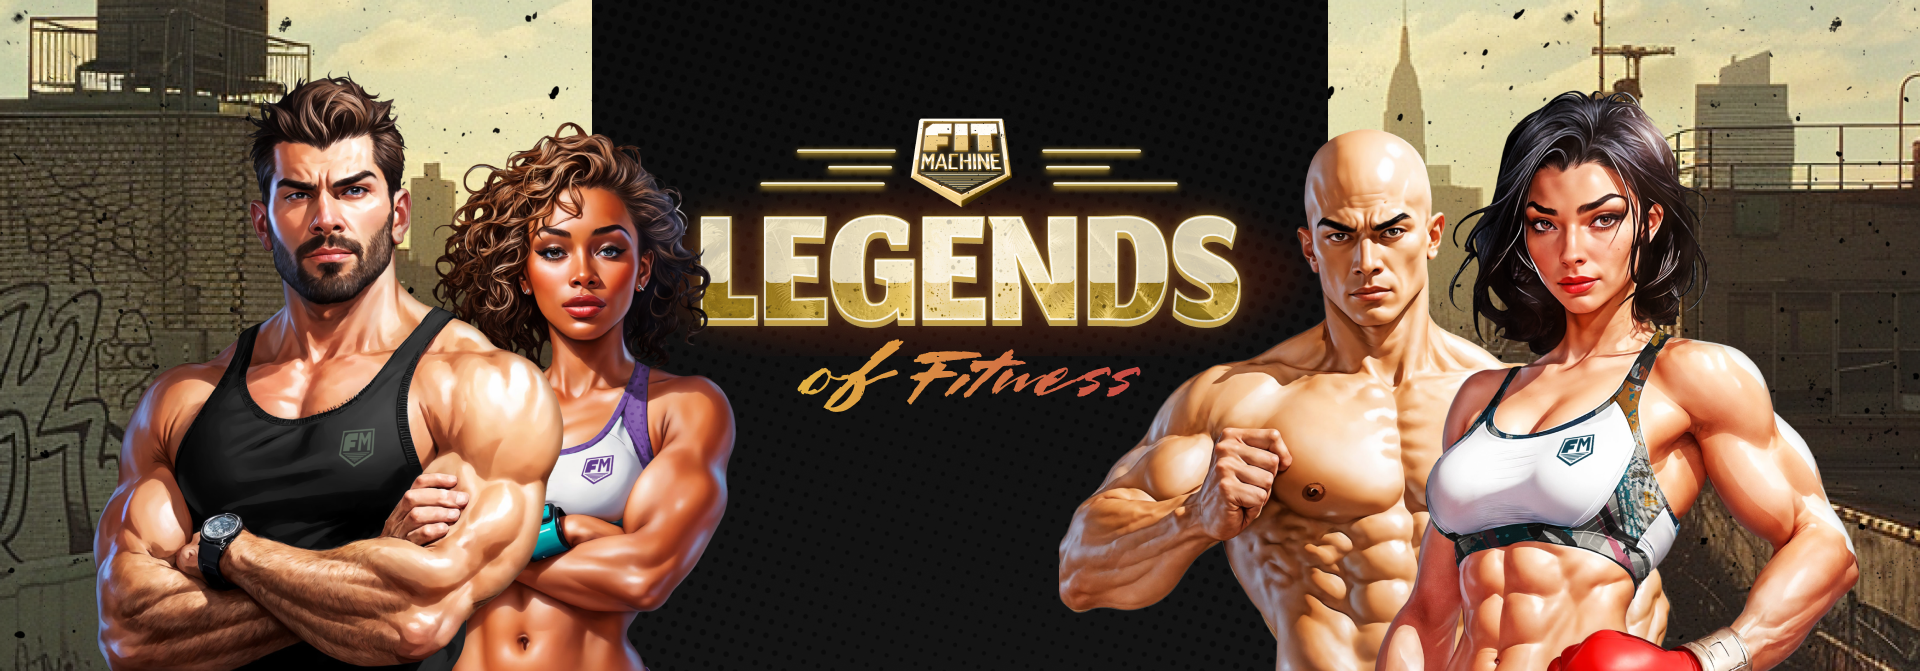 FitMachine: Legends of Fitness